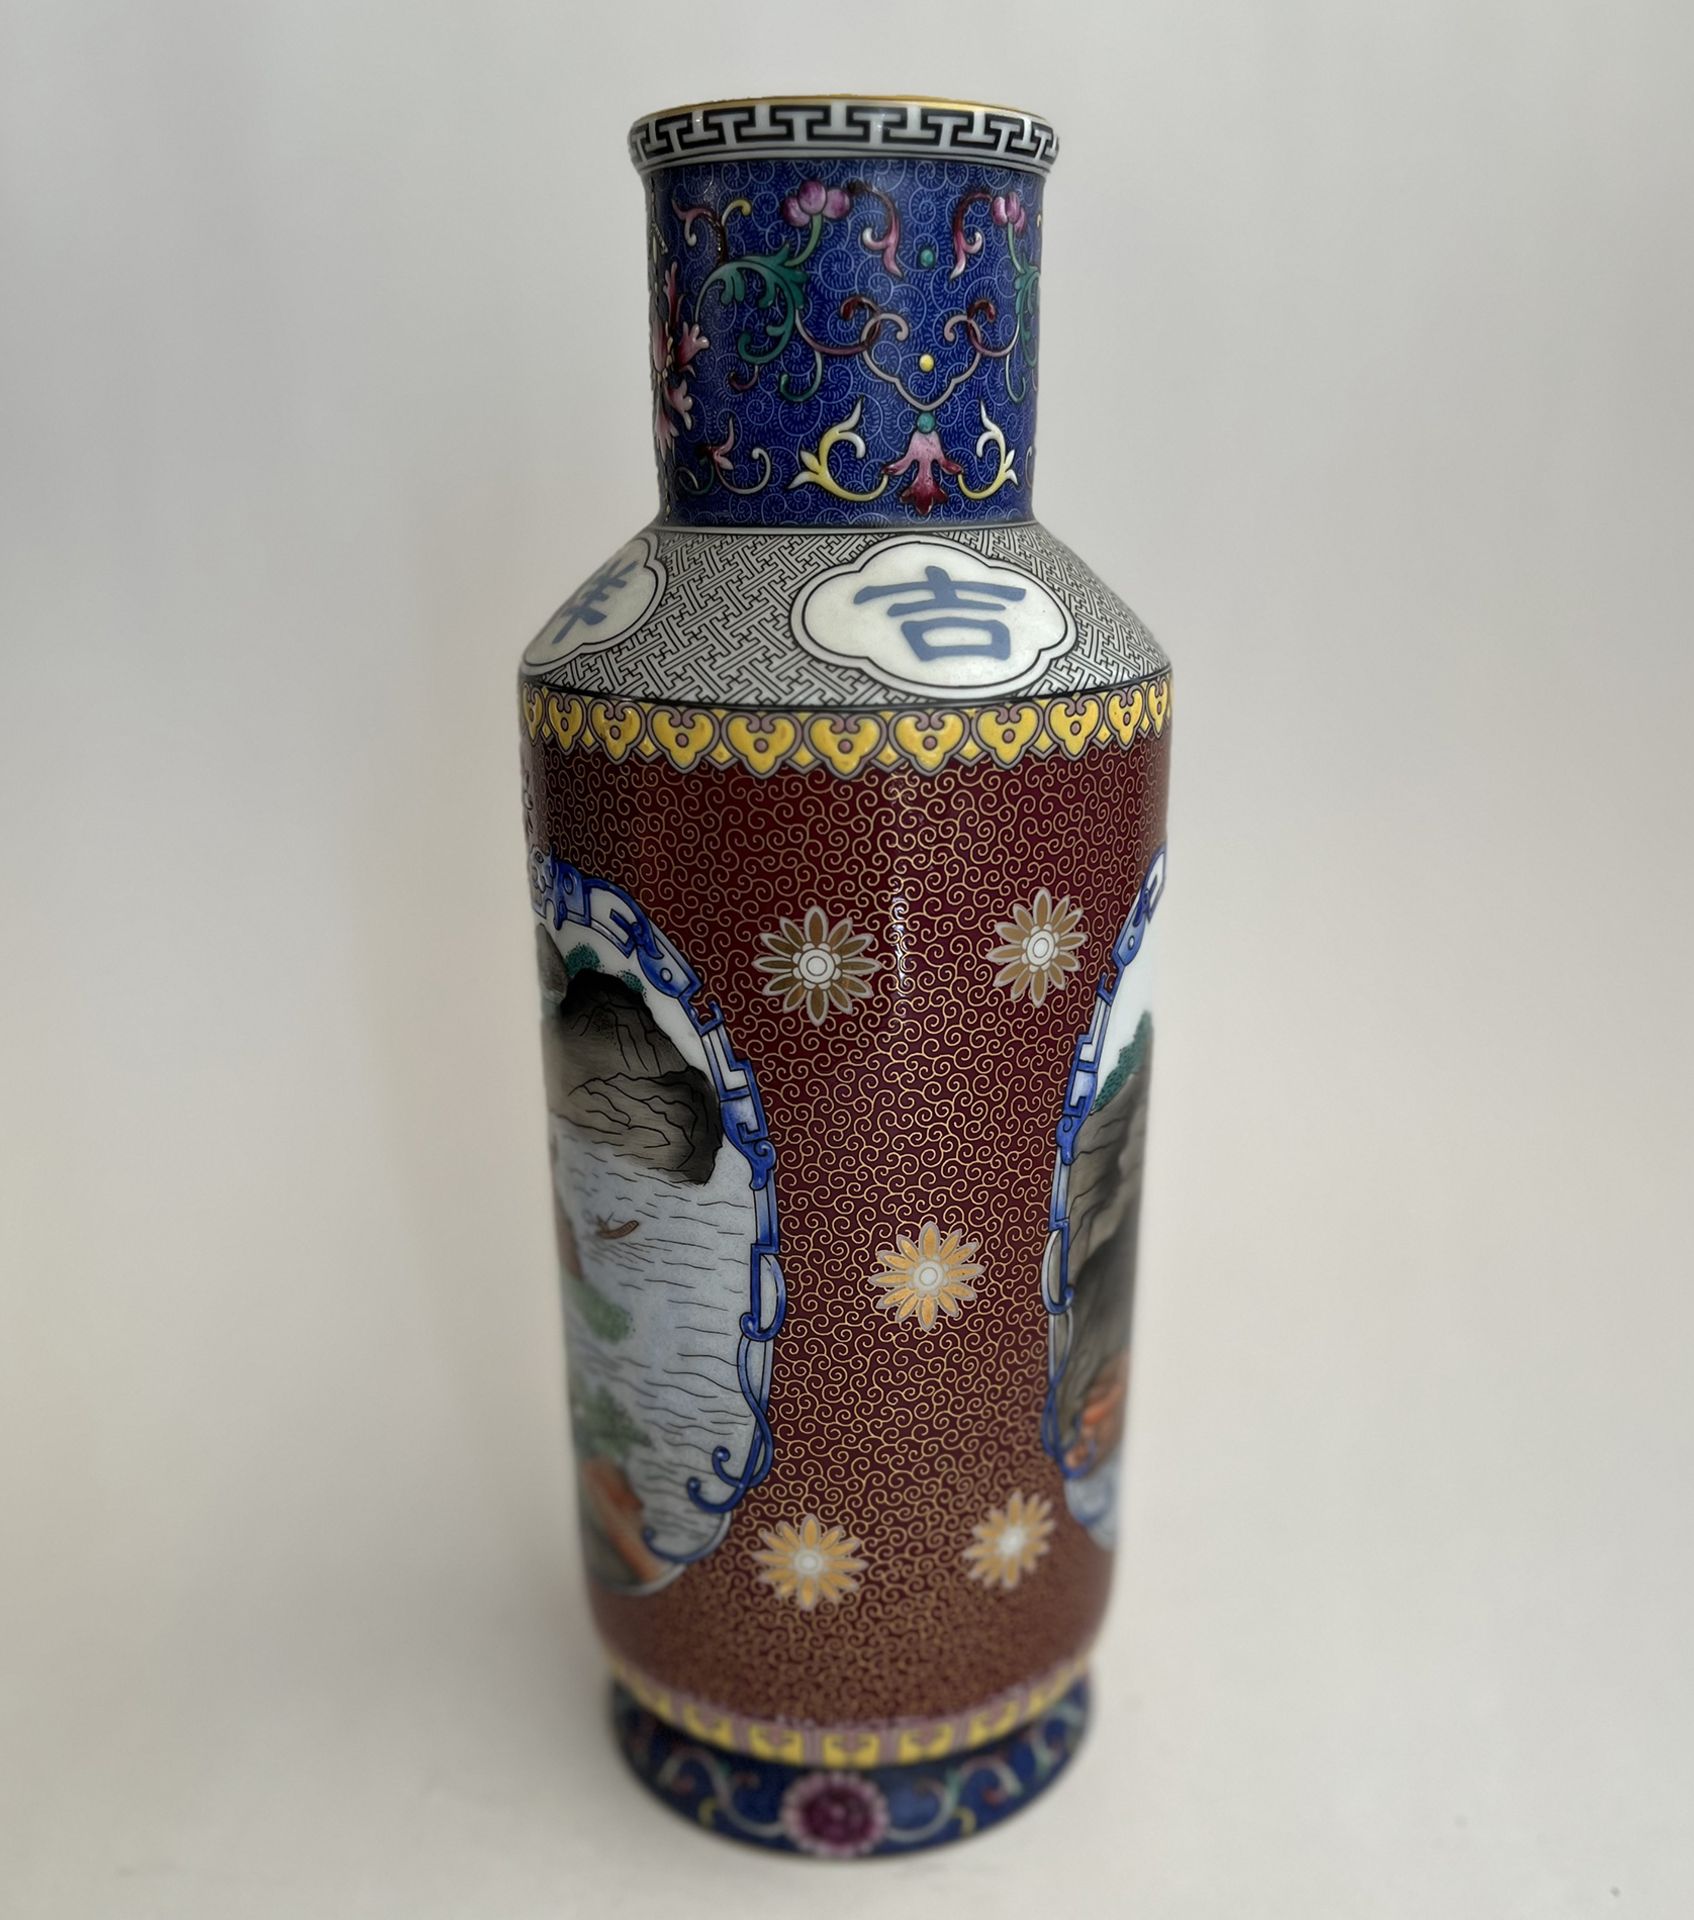 Rouleau vase with the four Shou characters of good auspices, 20th century - Image 2 of 6